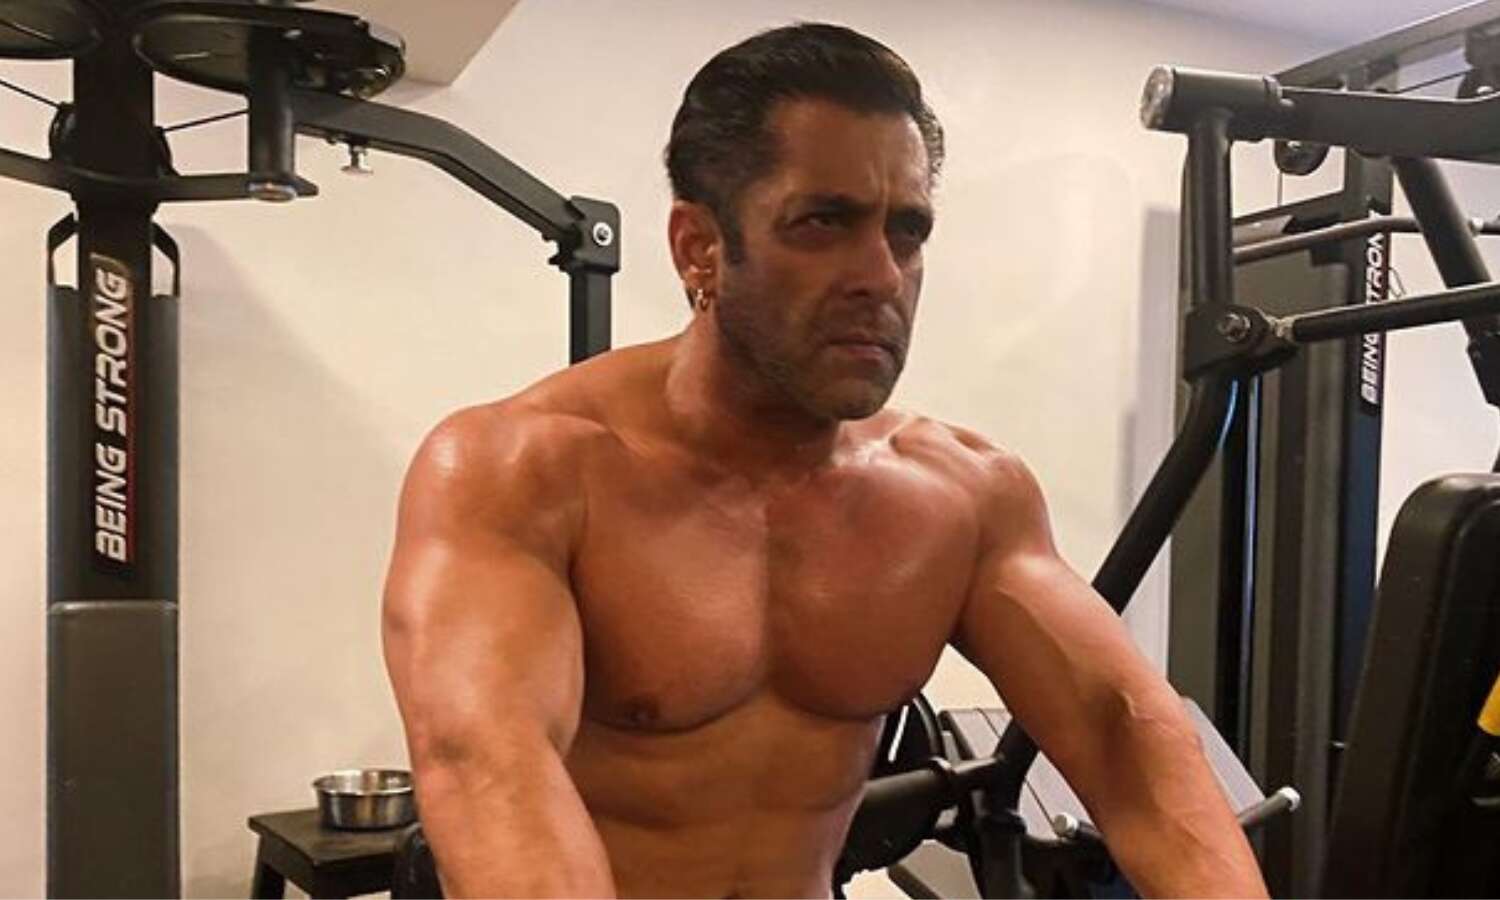 Salman Khan shares his shirtless pictures, fans see his picture and say ‘Baap of bodybuilding’